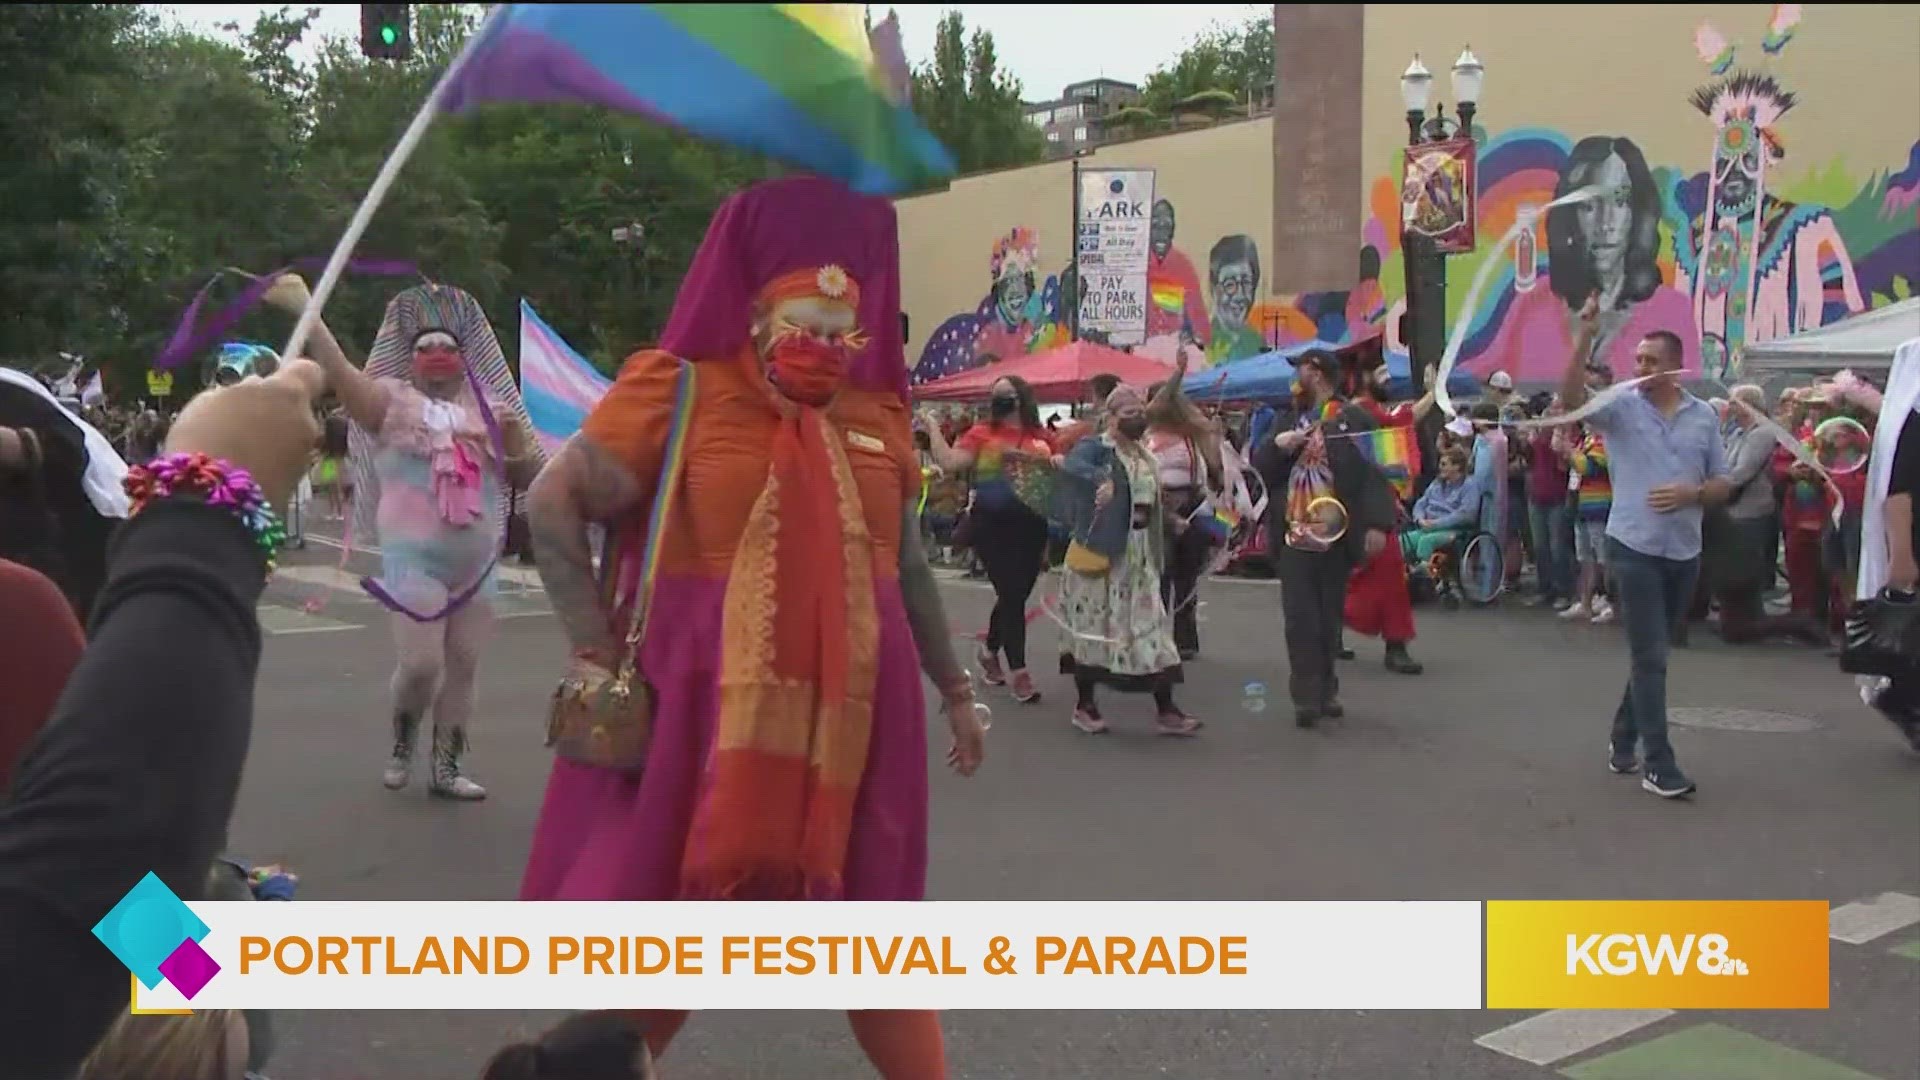 Portland Pride Parade & Festival is this weekend